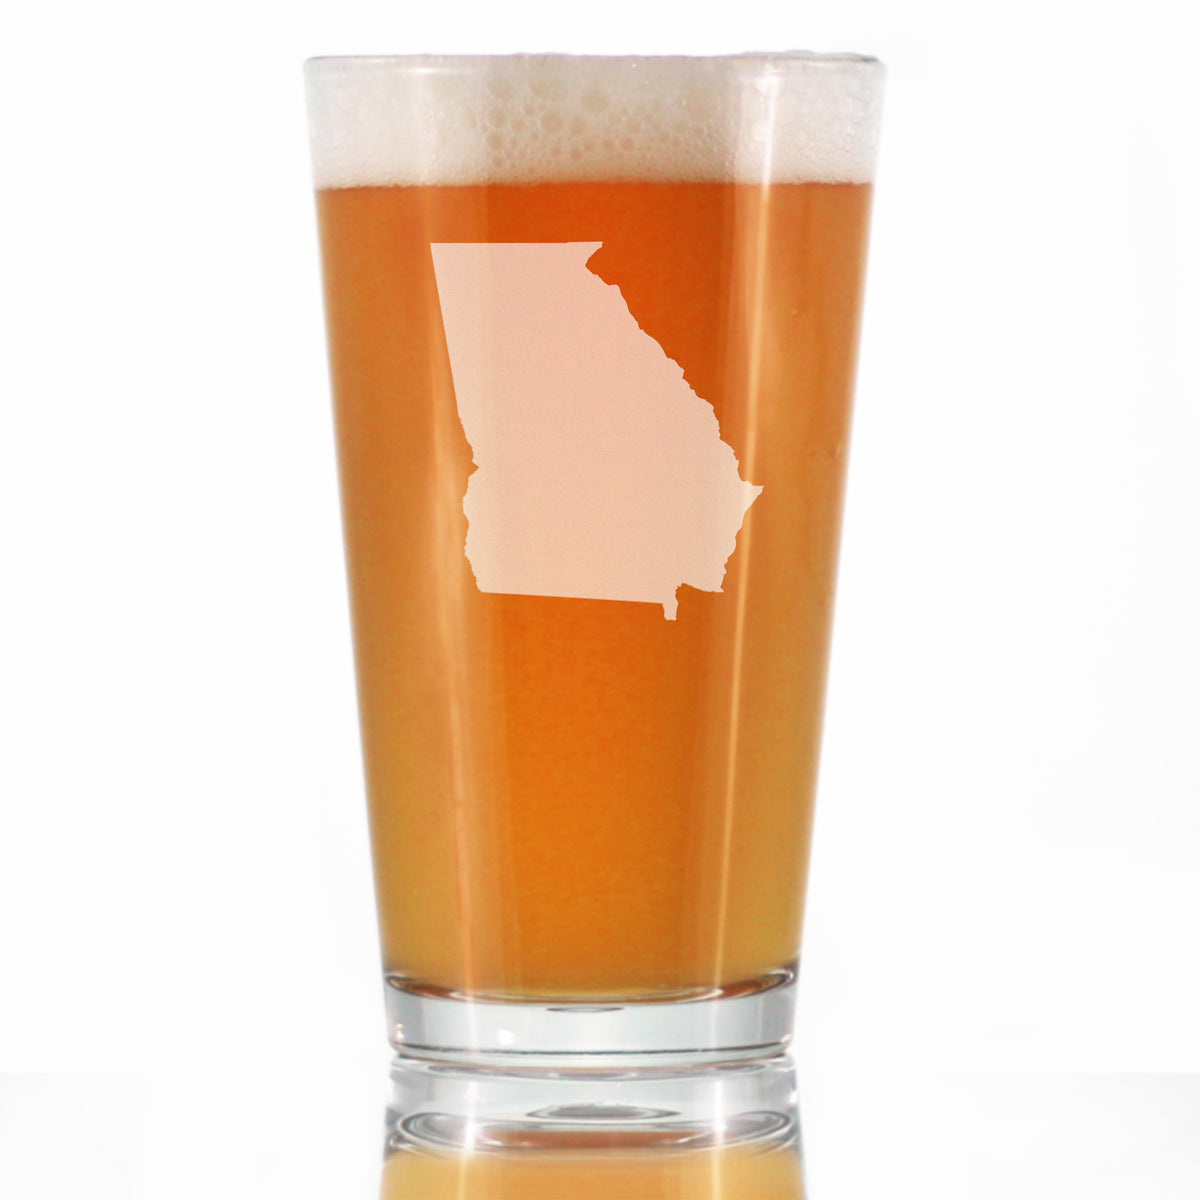 Georgia State Outline Pint Glass for Beer - State Themed Drinking Decor and Gifts for Georgian Women &amp; Men - 16 Oz Glasses